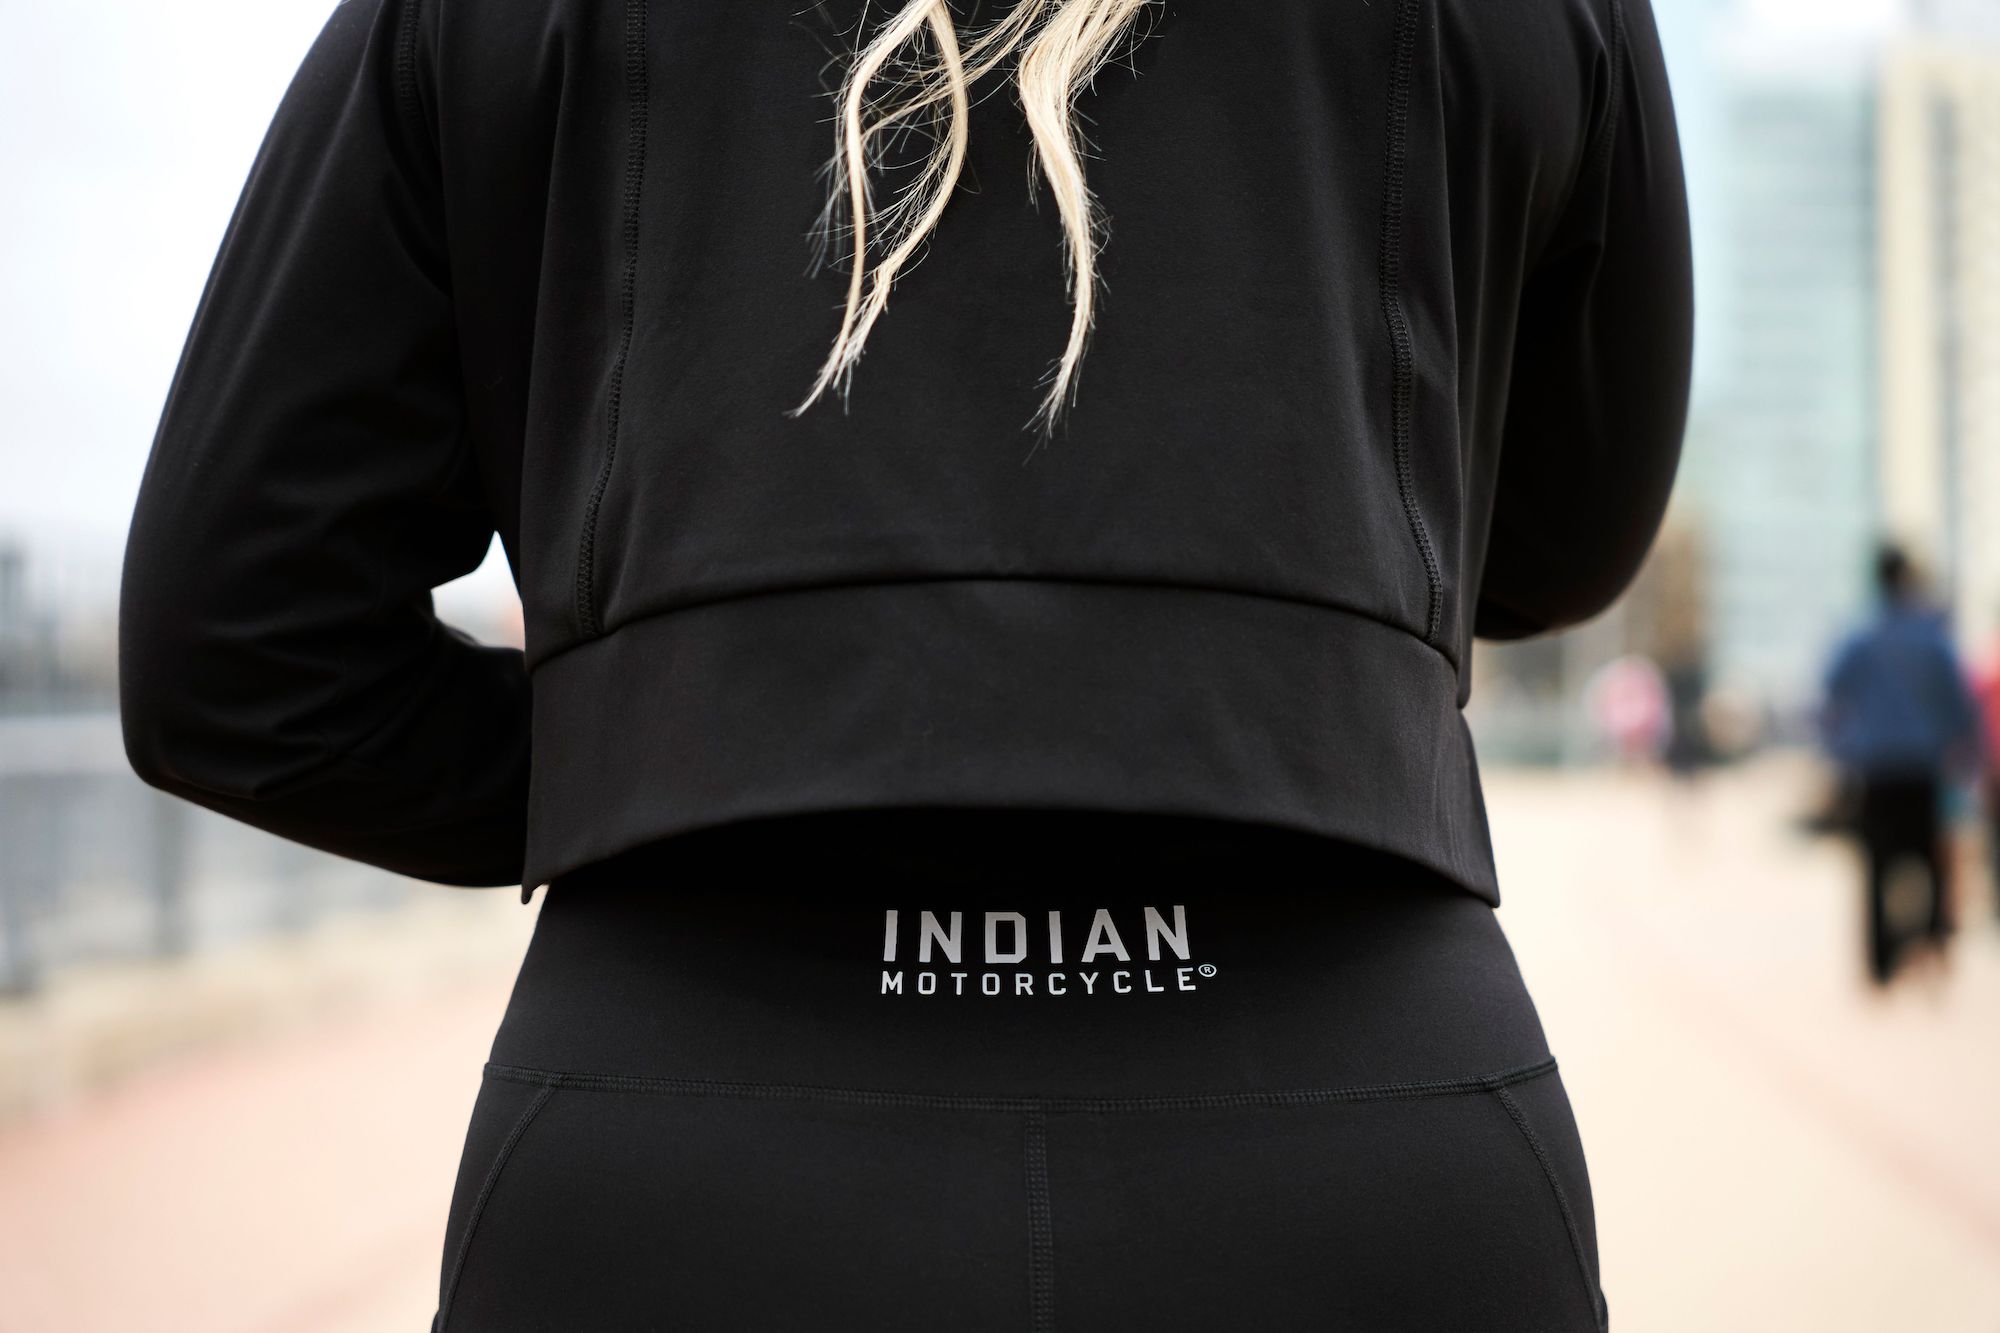 Indian's new Performance Apparel Collection, featuring tees, tanks and leggings. Media sourced from Indian Motorcycles.